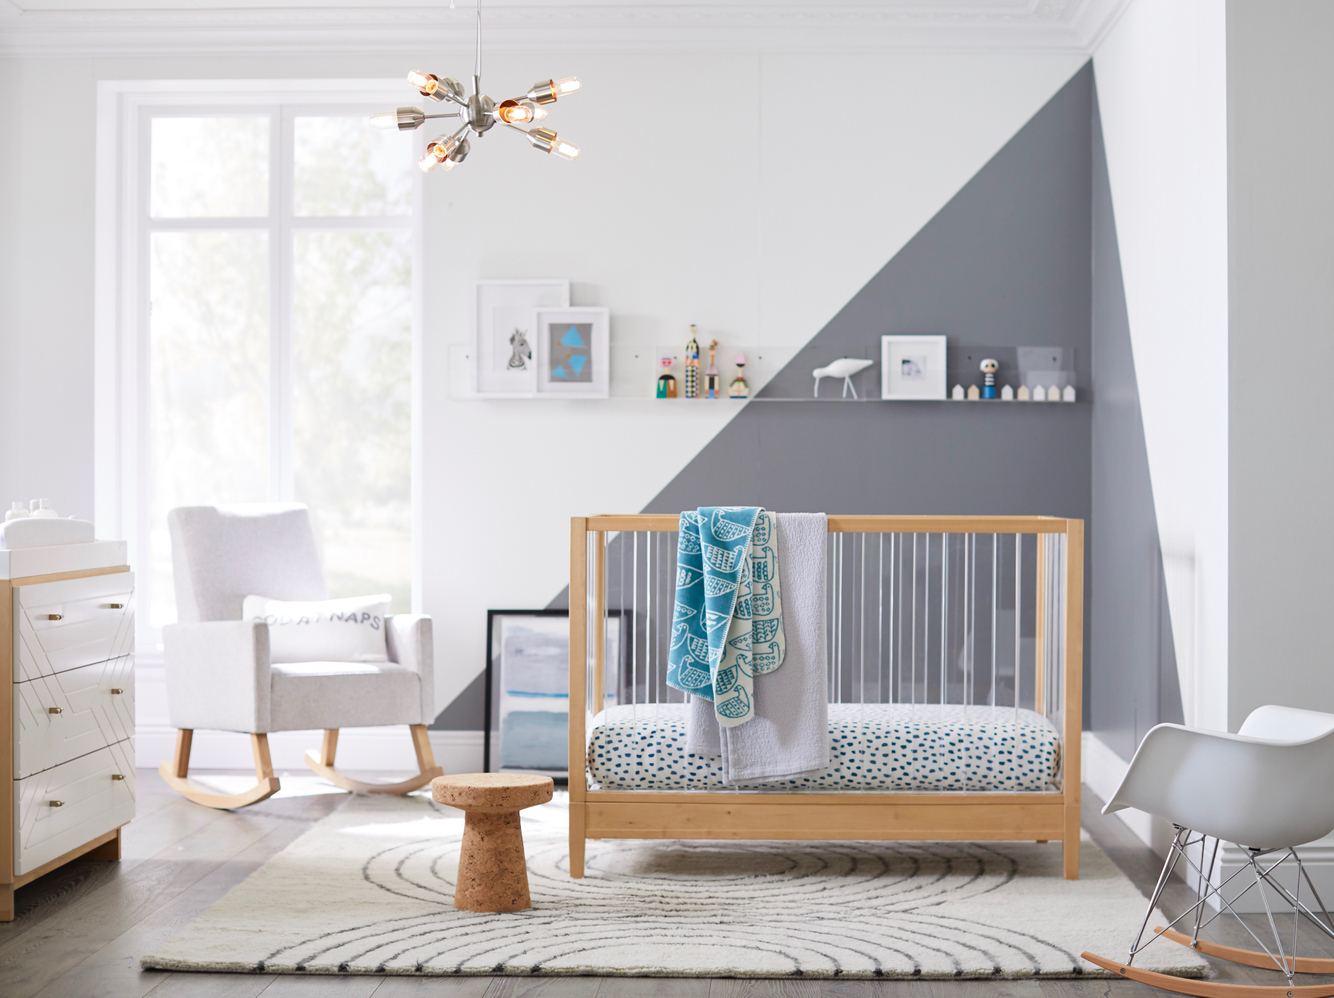 How to decorate a nursery with clean lines